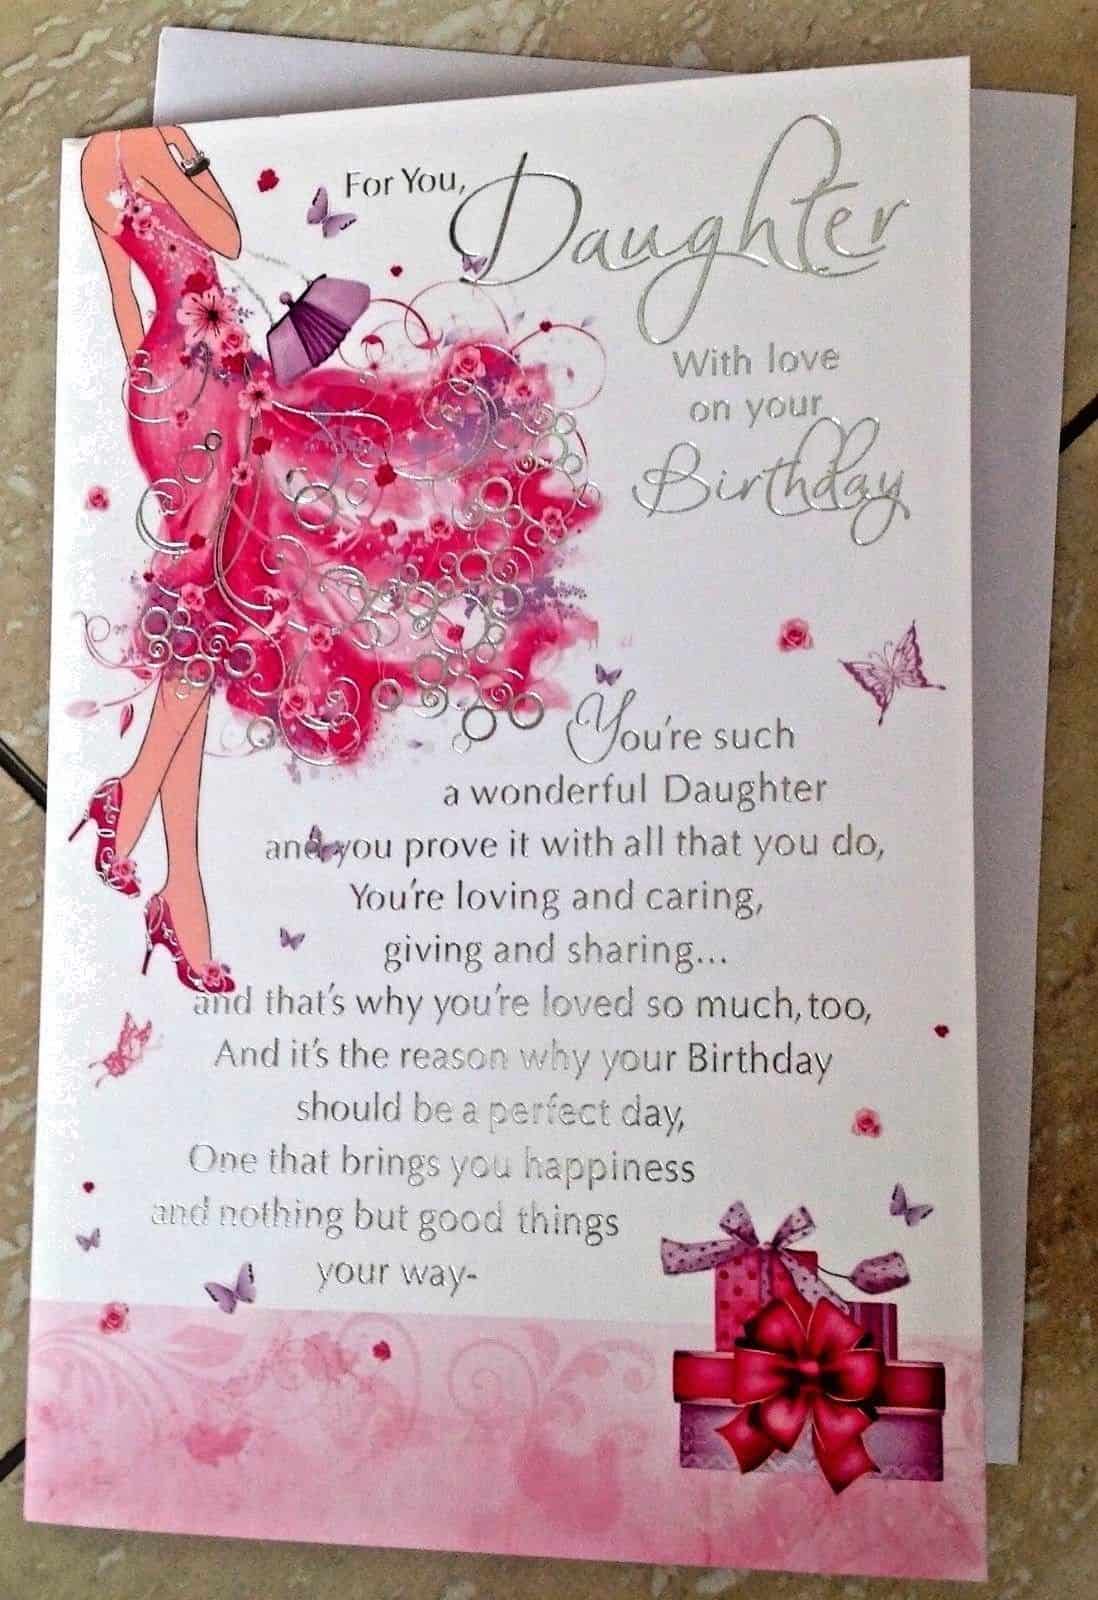 Top 22 Free Birthday Cards For Daughter Home Family Style And Art Ideas 